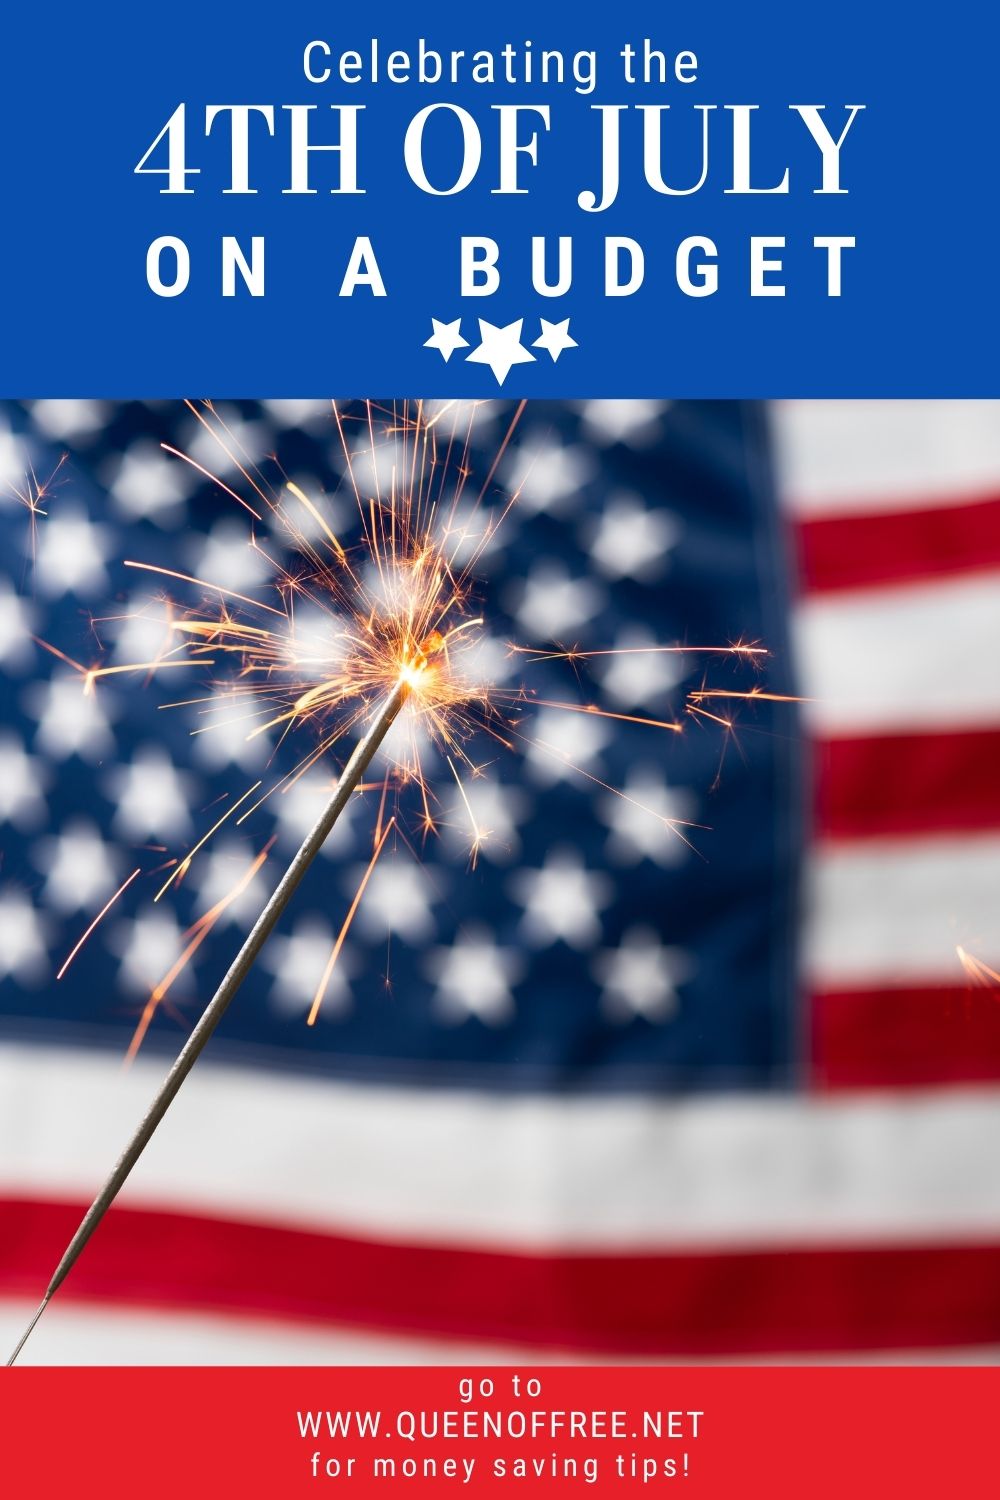 Enjoy your holiday this year without having to worry about your wallet. These 4th of July Money Saving Tips help make everything better!